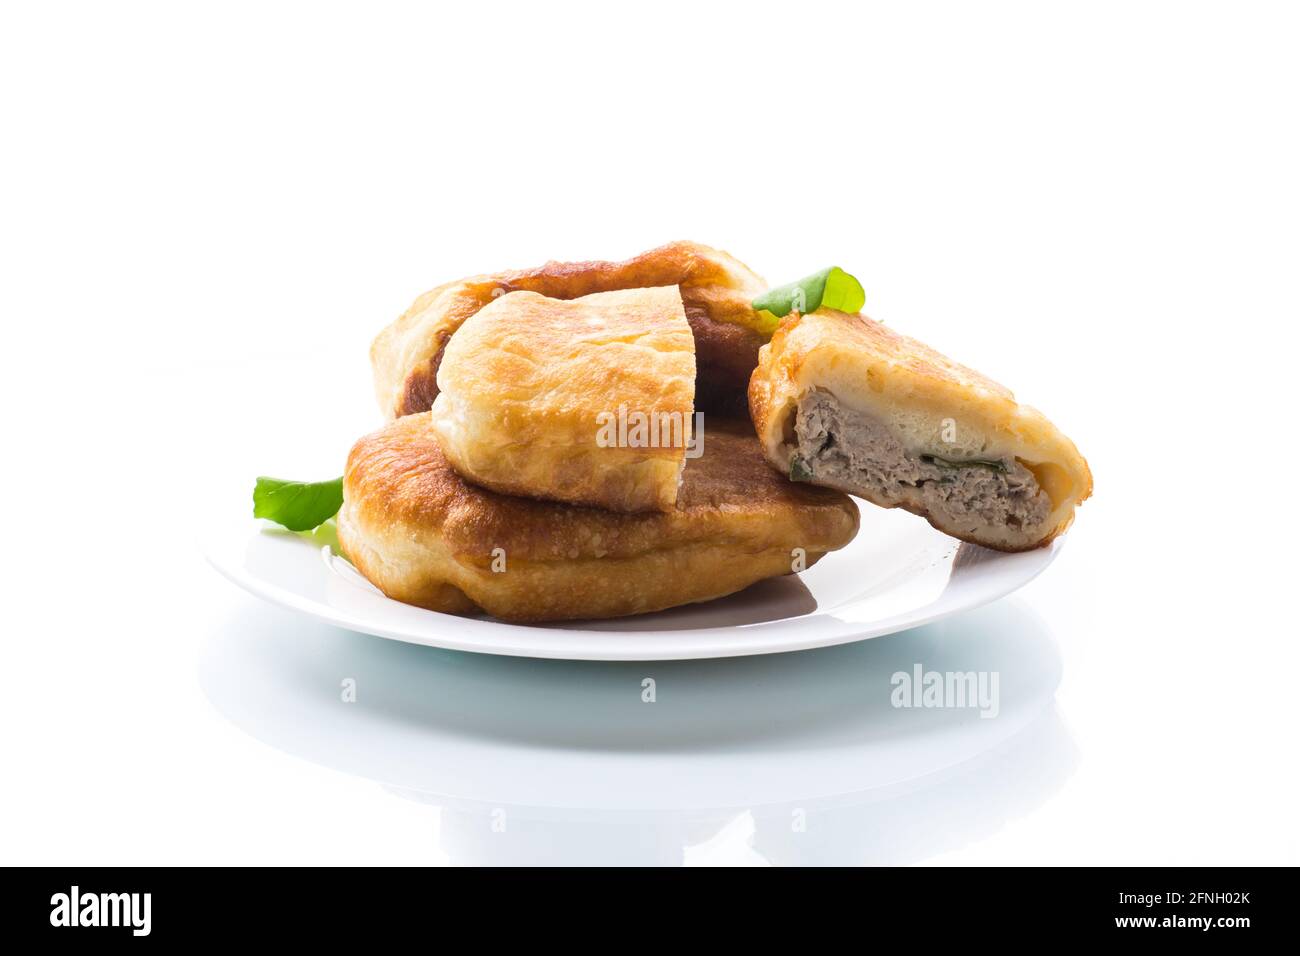 fried pies with meat in a plate on a white background Stock Photo